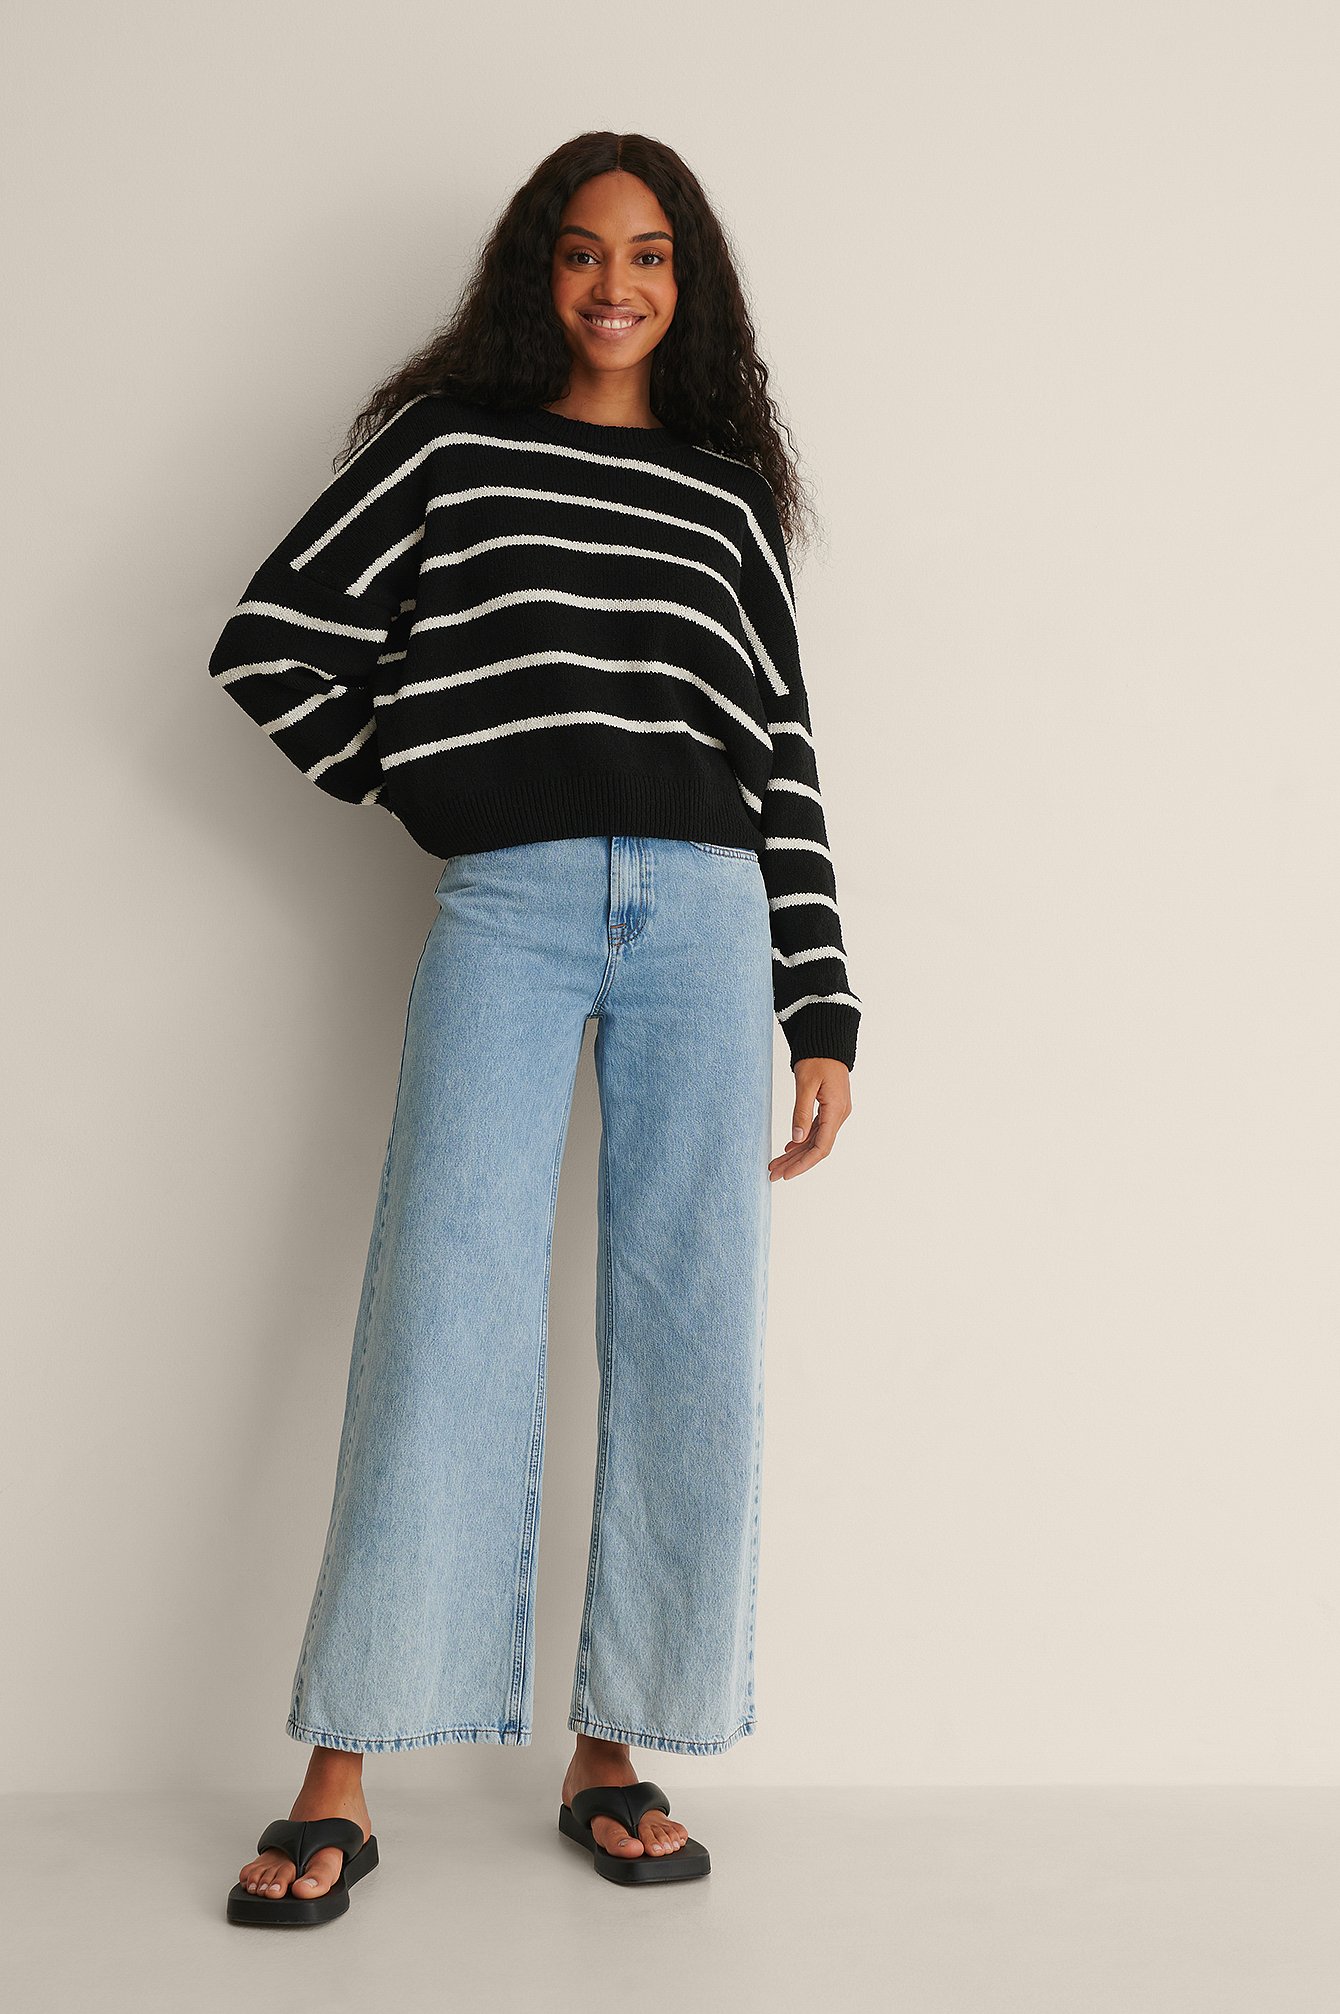 Black Striped Knitted Sweater